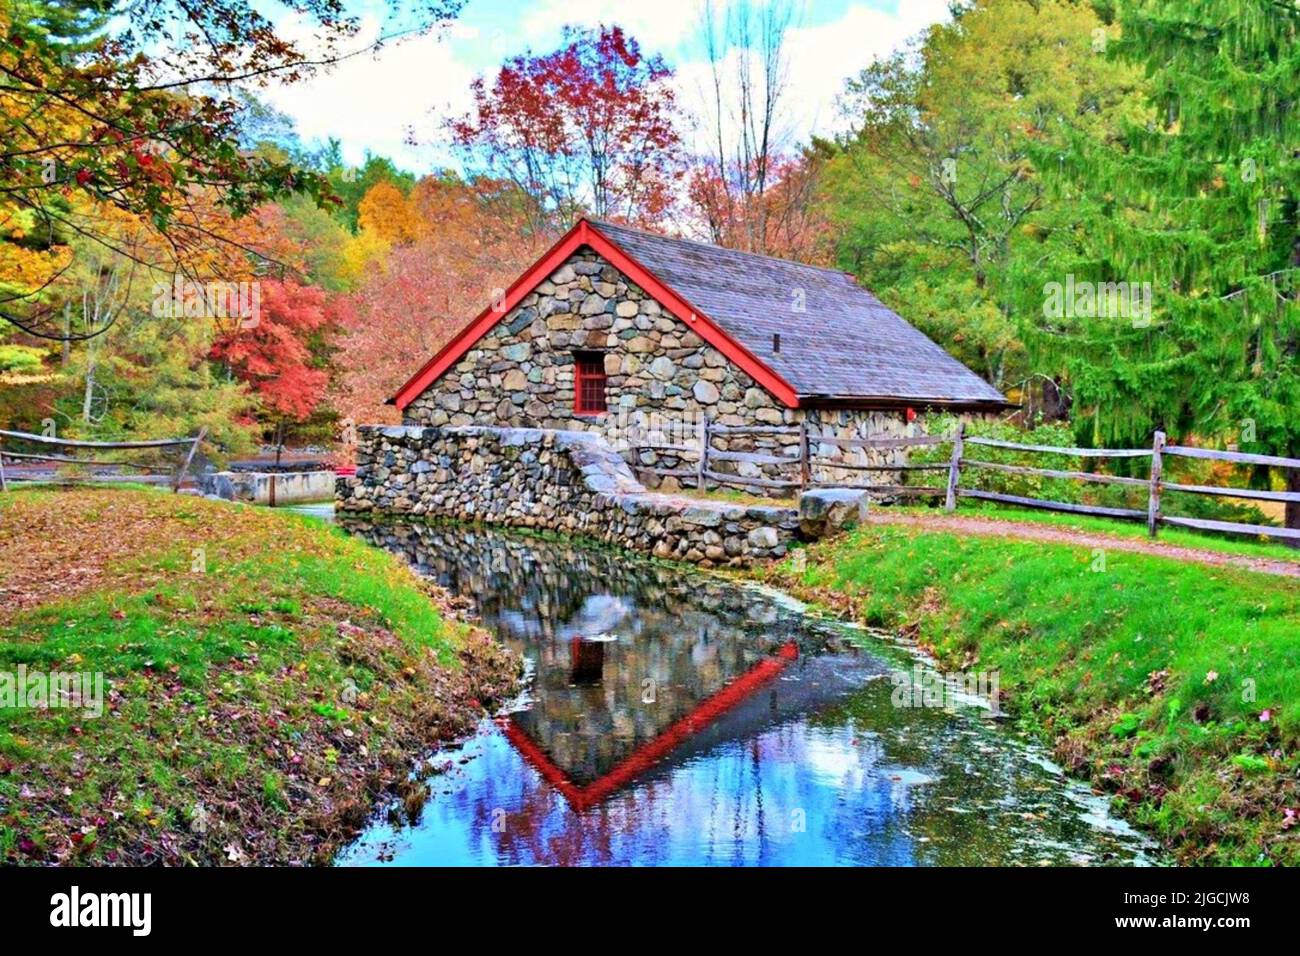 The backside of the Grist Mill located in Sudbury, Massachusetts reflecting in Grist Mill Pond Stock Photo